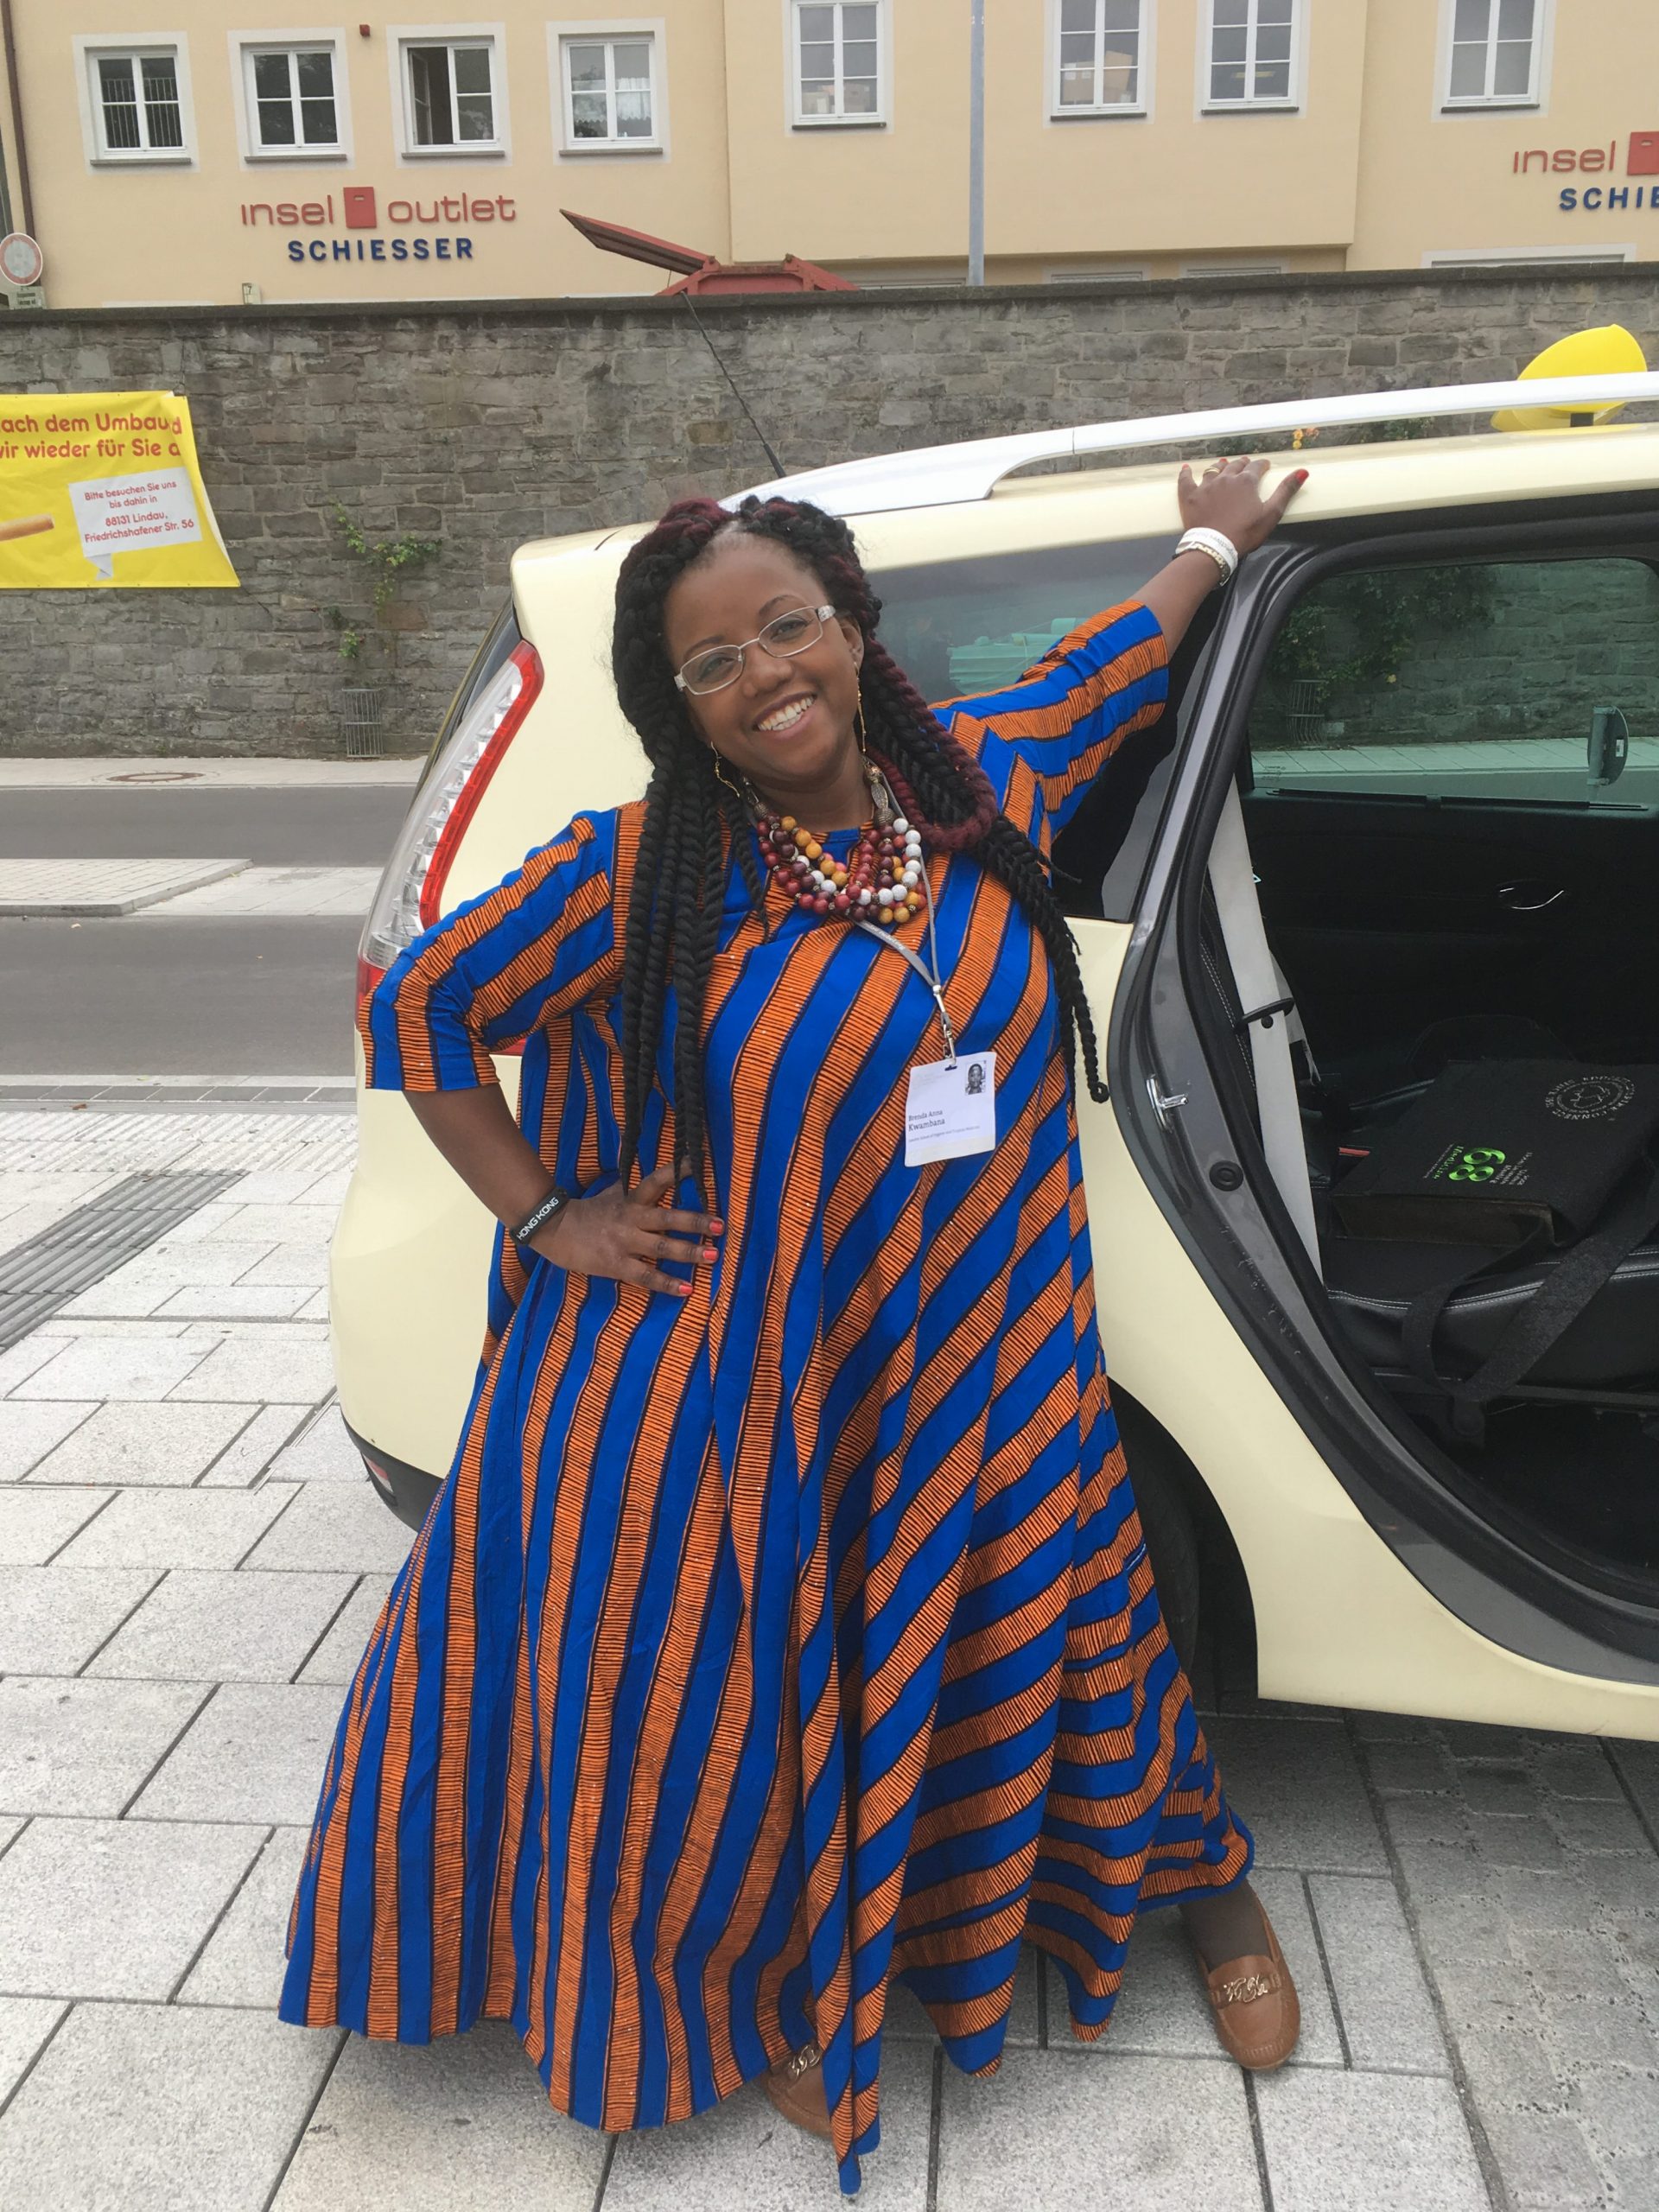 “I can wiggle my bump very quickly – you know, I can twerk.“
We met Brenda, who explores tropical diseases in Gambia and London, right before she jumped into her taxi. She entered it laughing and then asked: “So this quote will end up right next to my picture and name?“